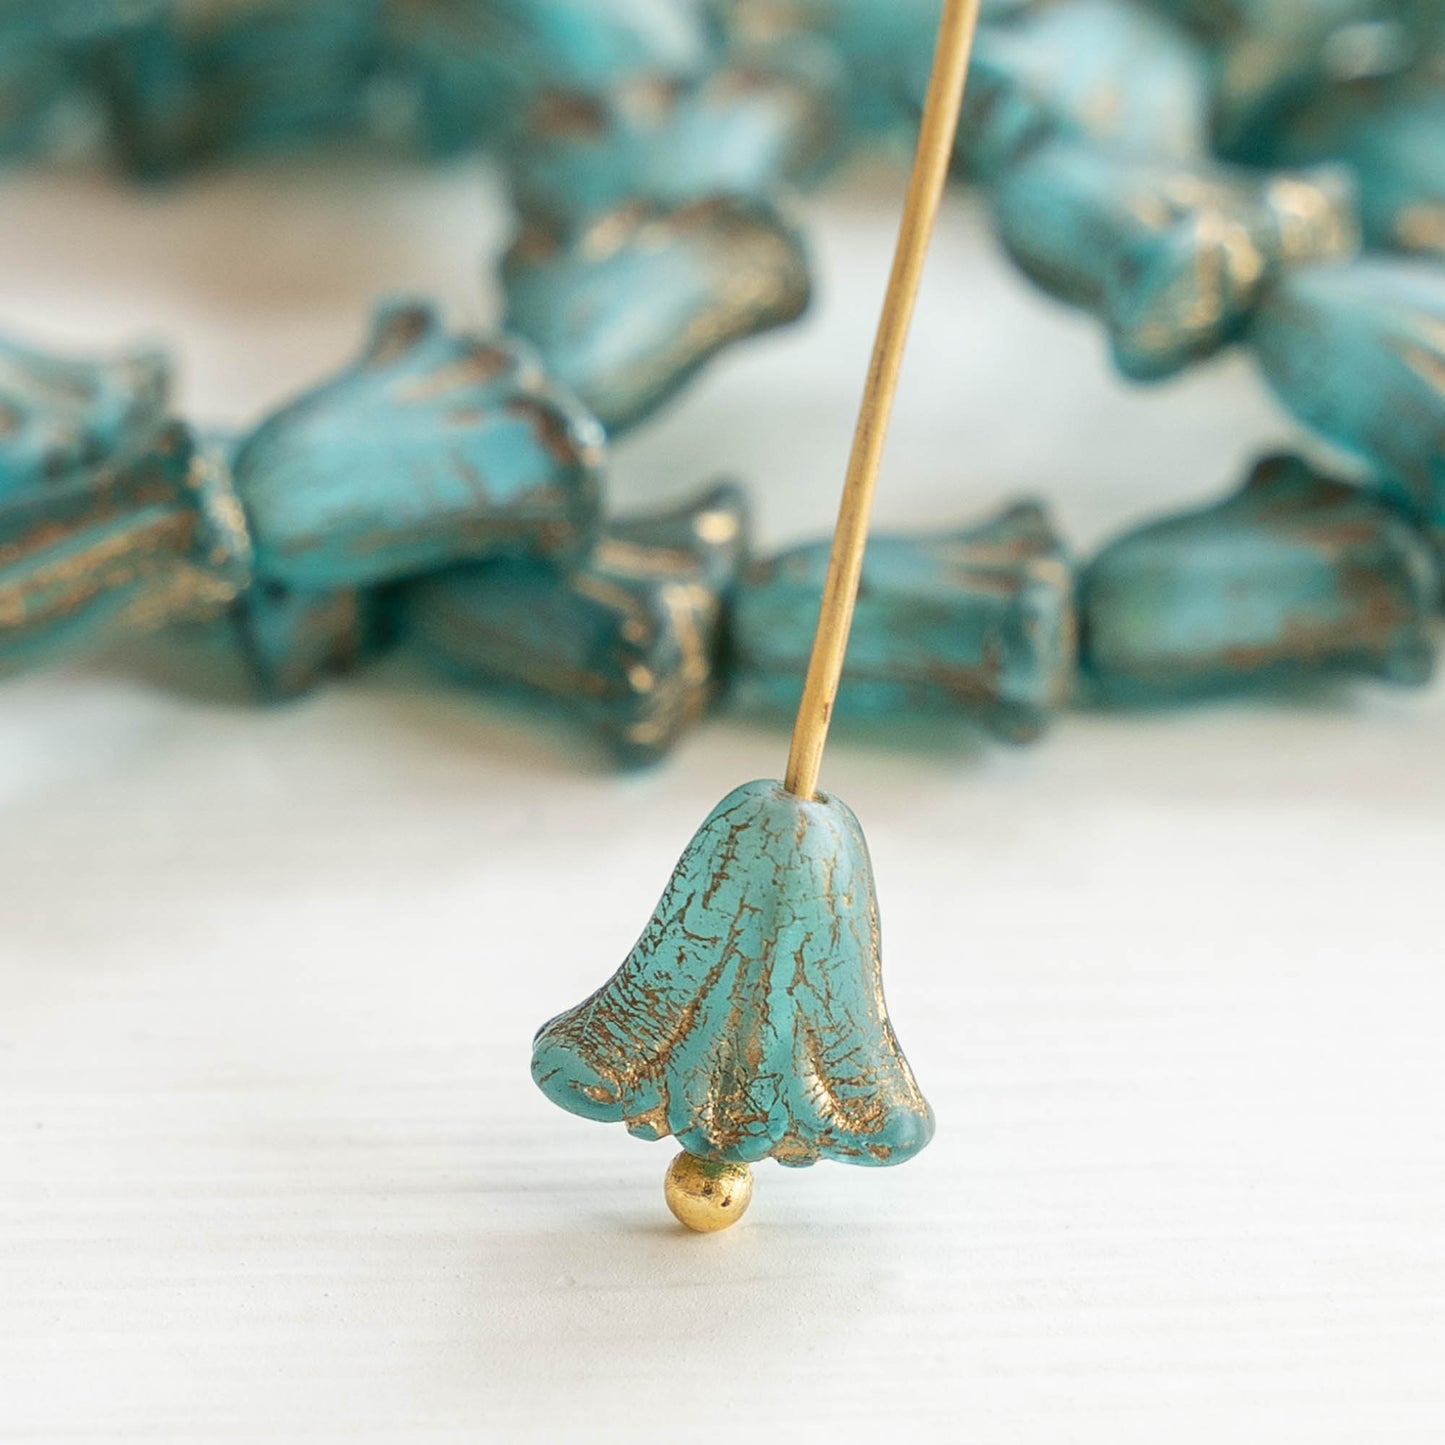 Load image into Gallery viewer, 9x10mm Lily Flower Beads - Aqua with Gold Wash - 15 Beads
